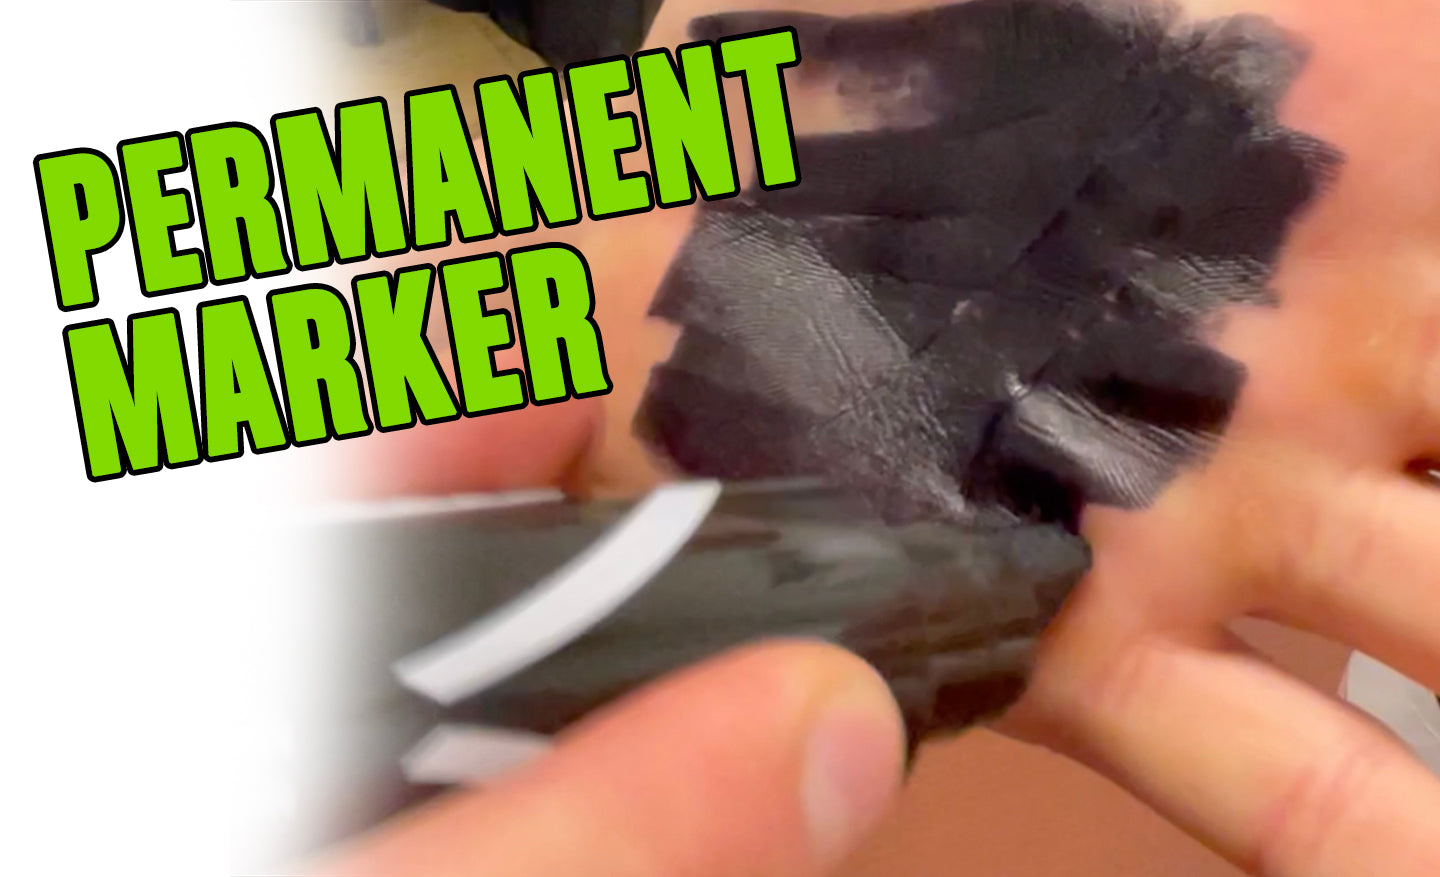 How To Remove Permanent Marker & Get Sharpie Off Skin